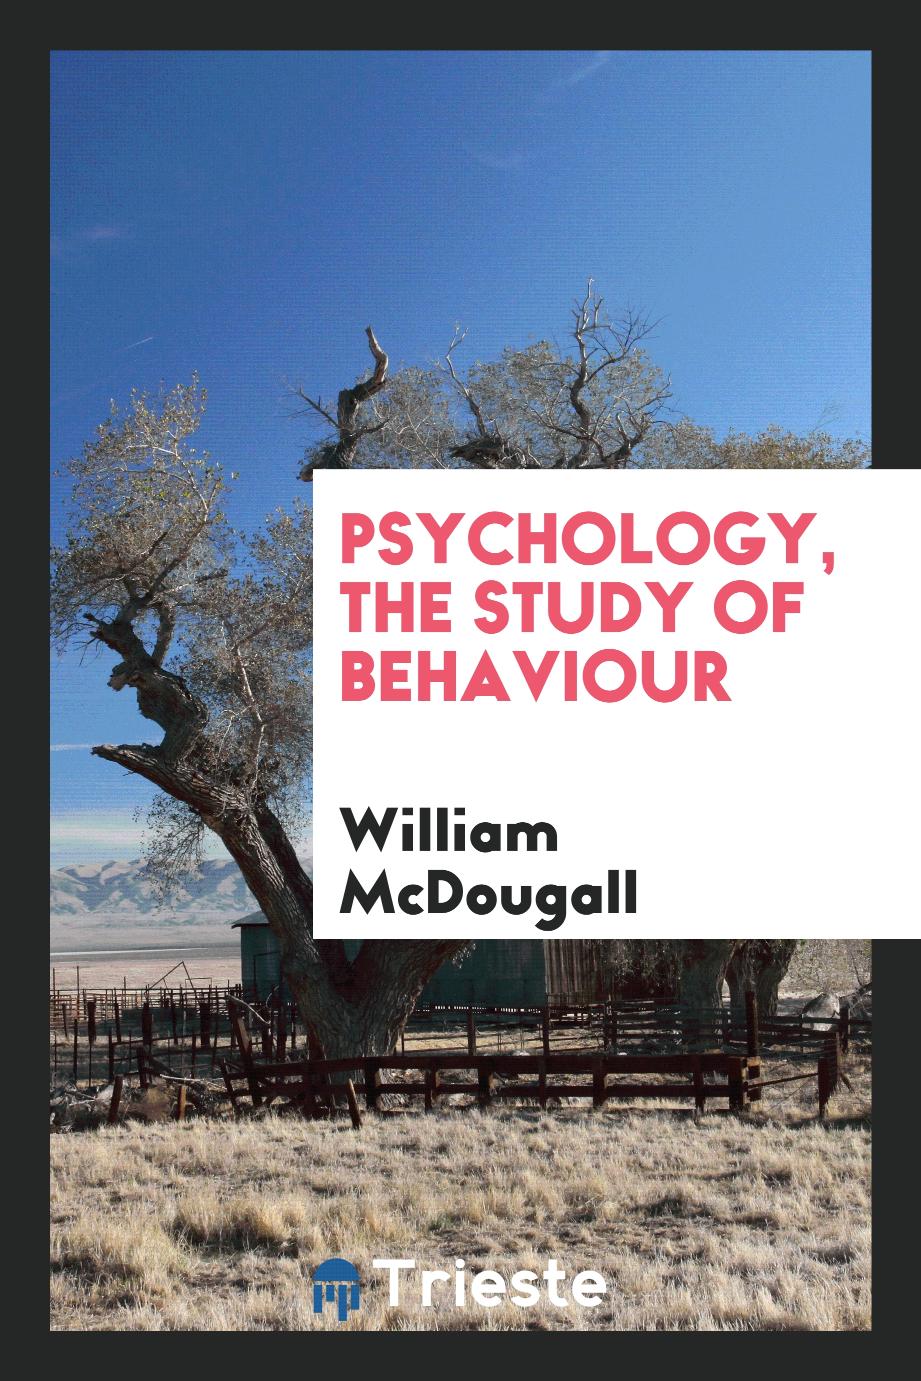 William McDougall - Psychology, the study of behaviour